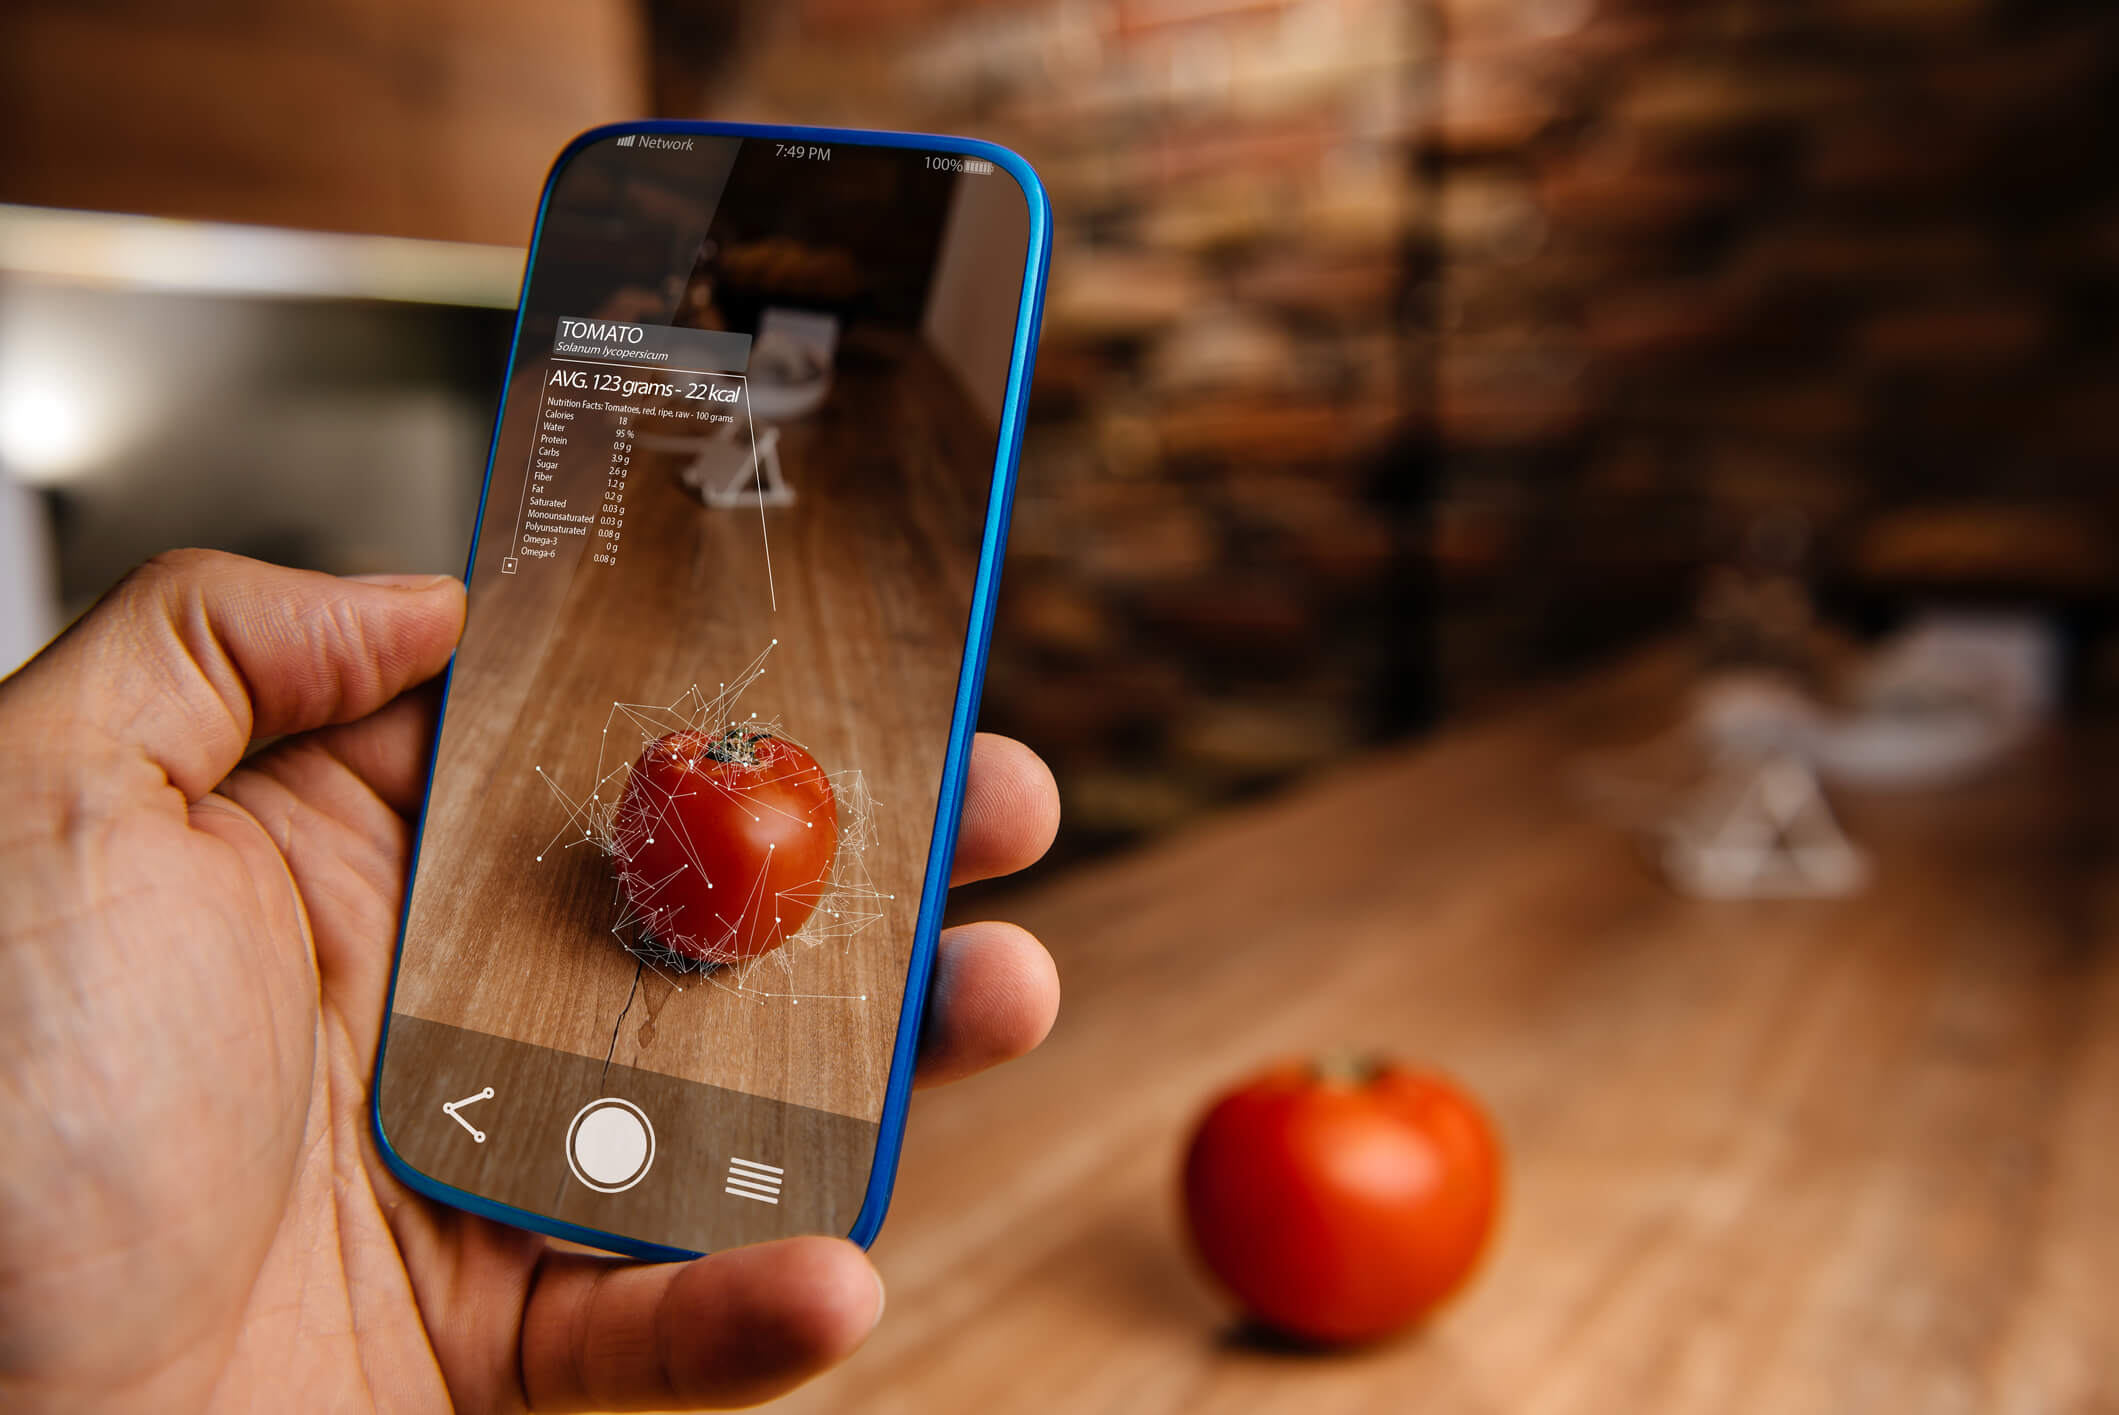 Tomato in augmented reality